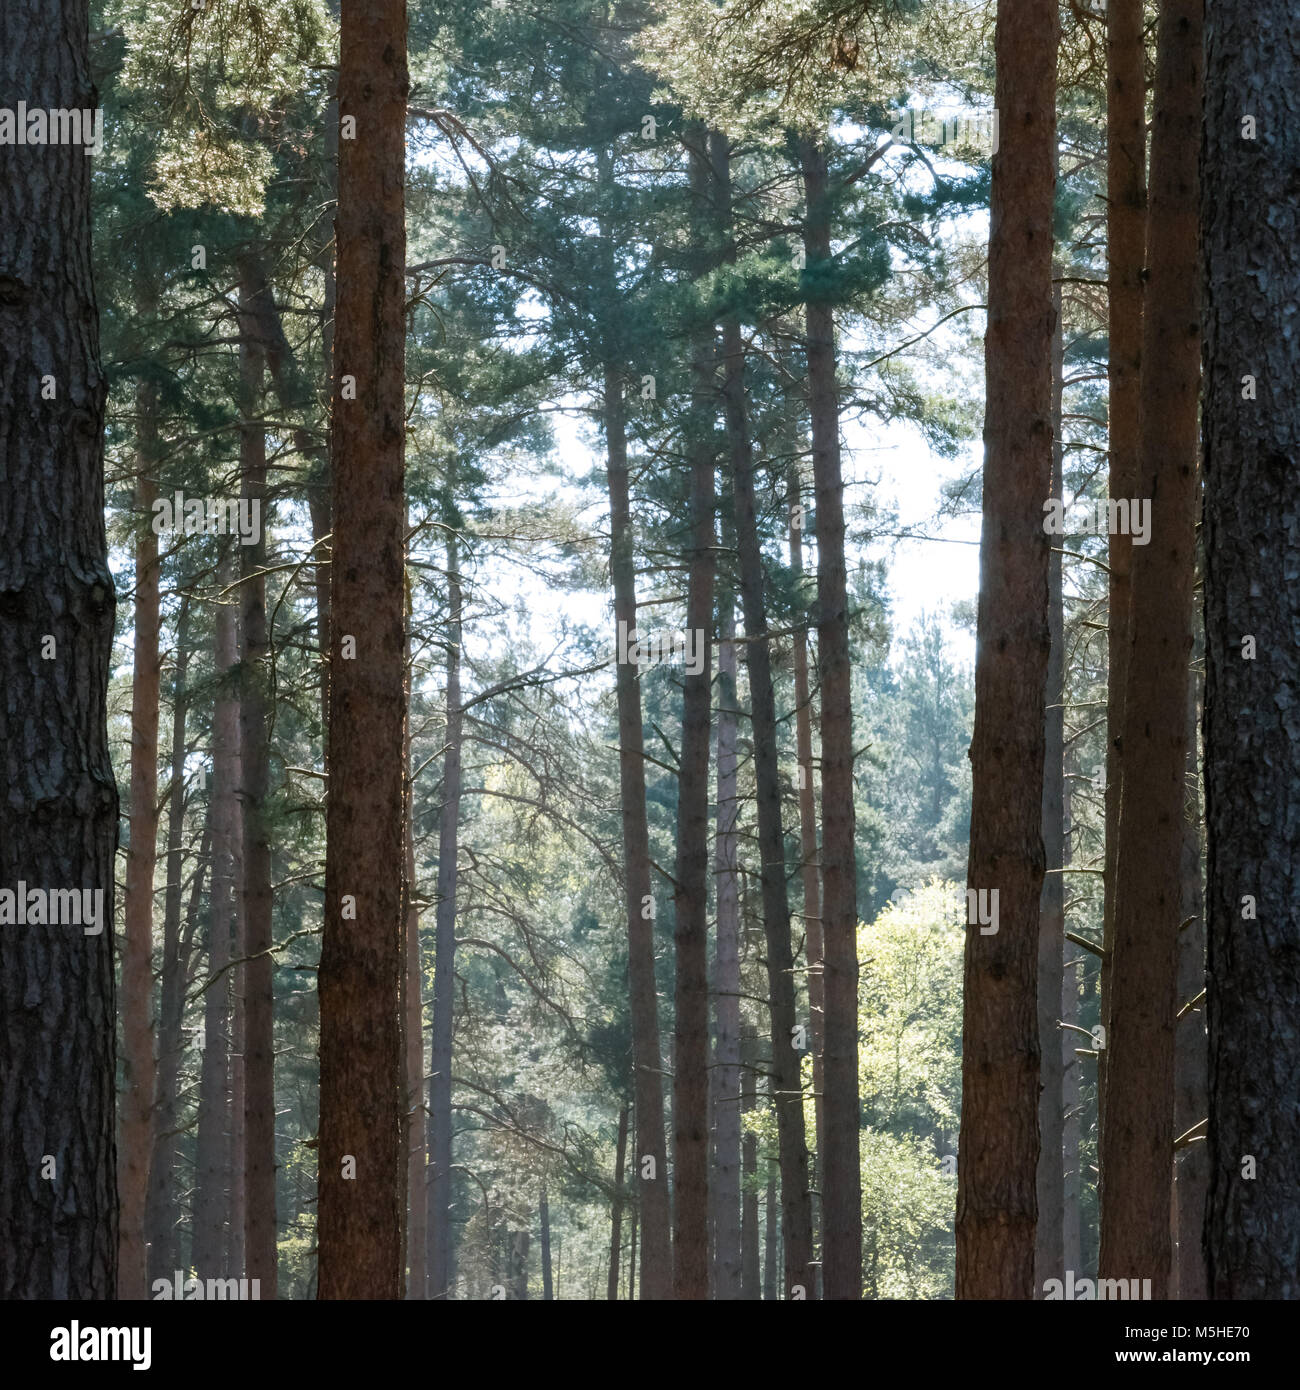 Trees in a pine forest Stock Photo